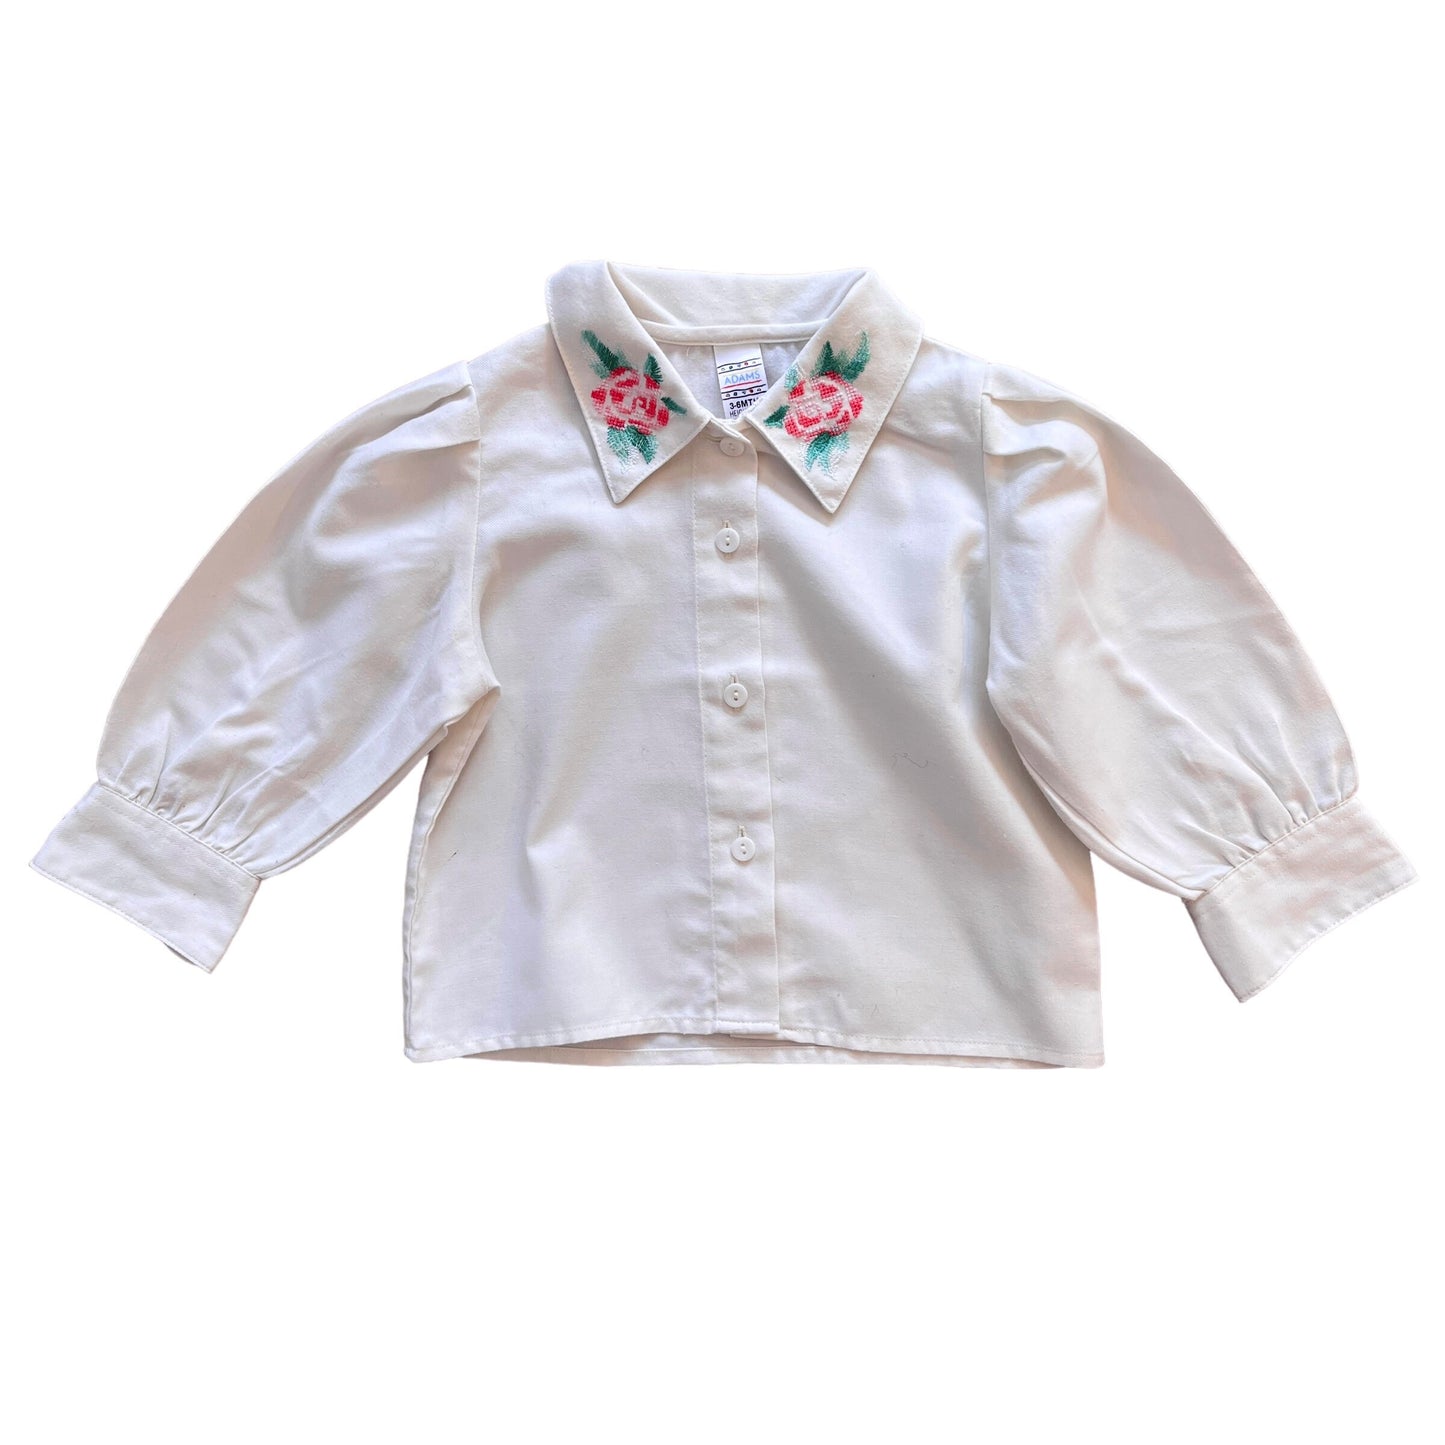 Vintage 1980s Ivory Embroidered Shirt 3-6 Months